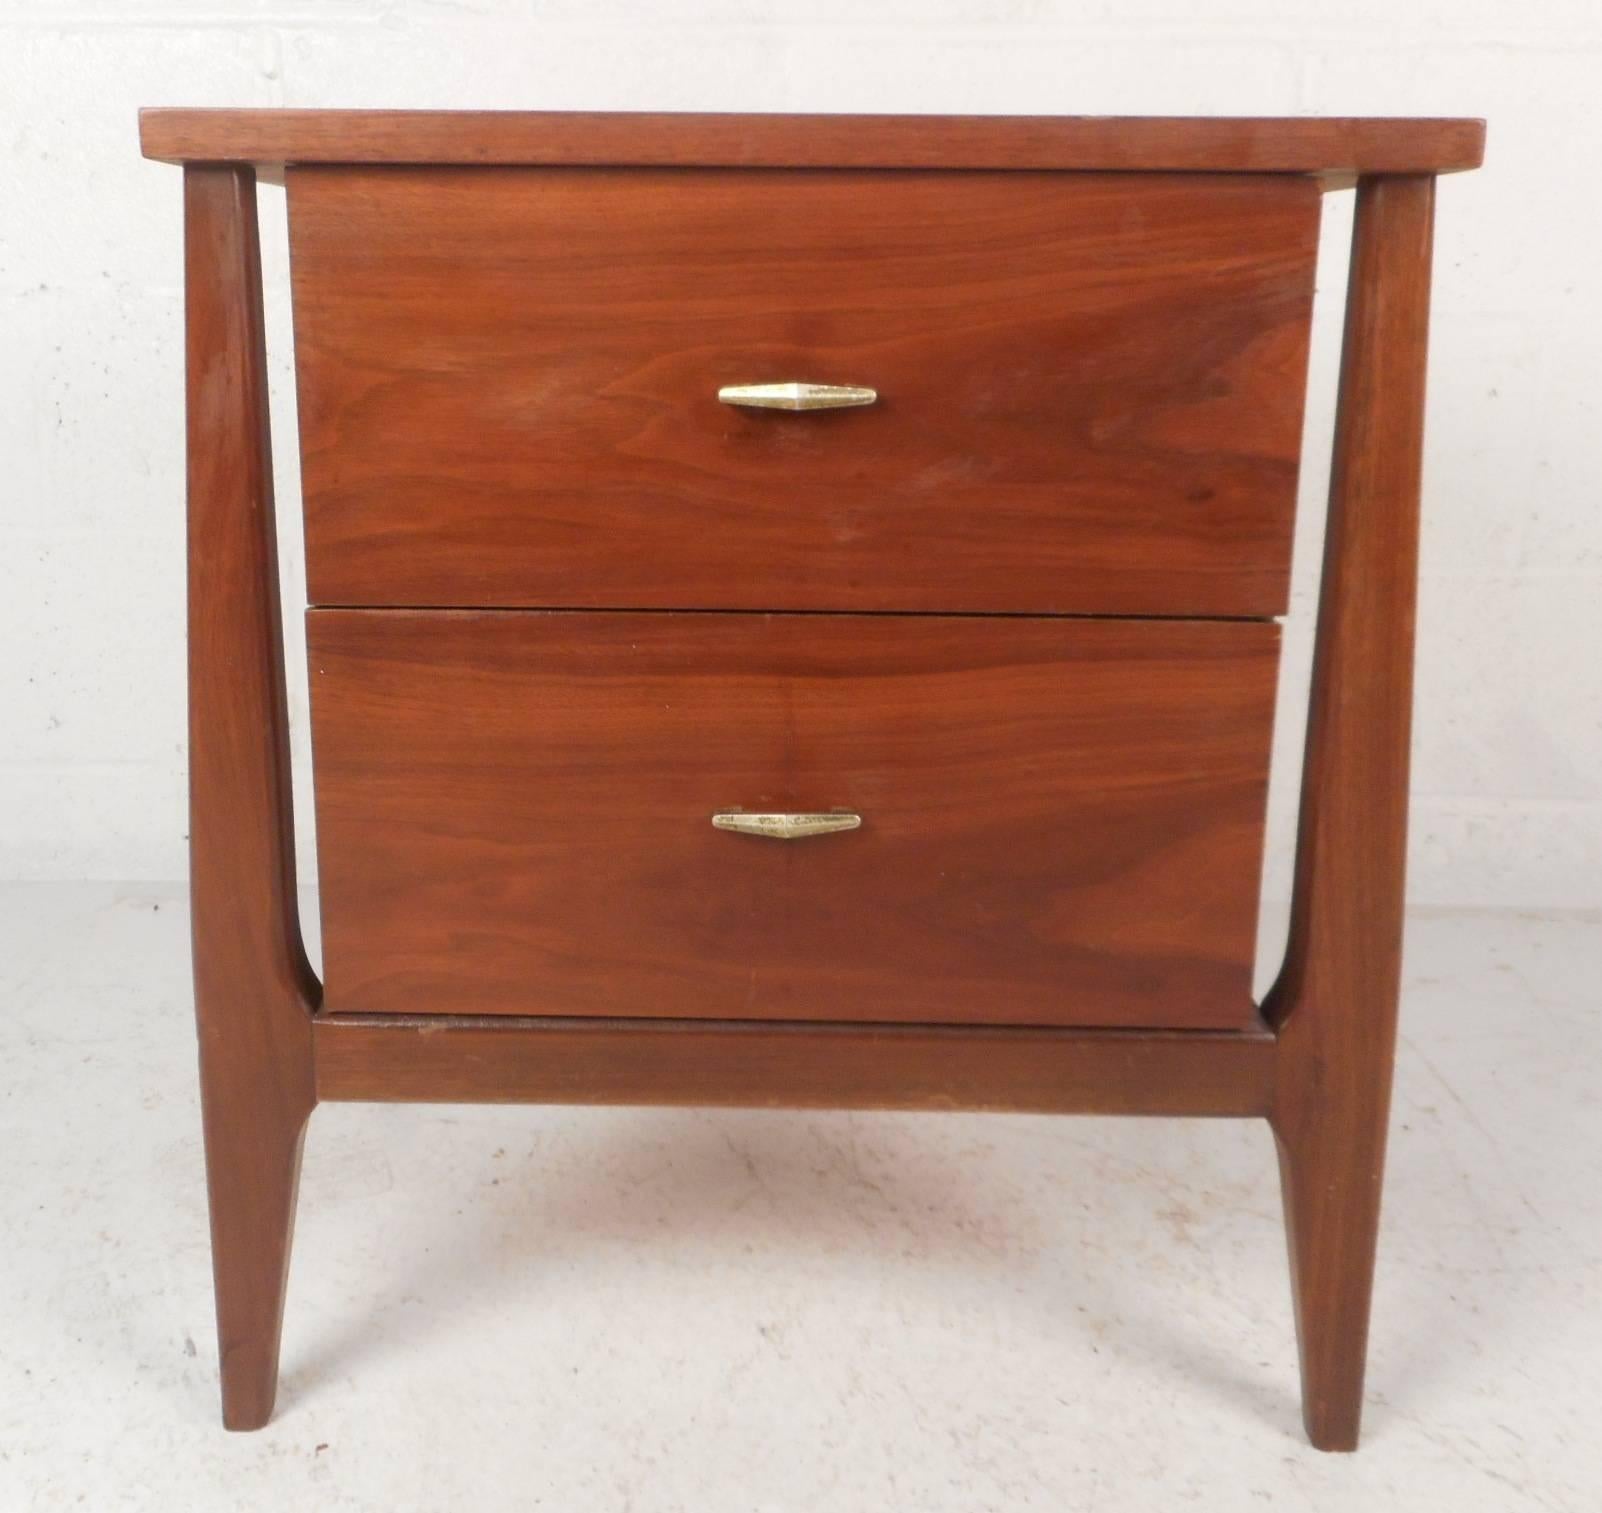 Beautiful vintage modern nightstand features a floating design with angled and tapered legs. Sleek Mid-Century piece has two large drawers with unusual sculpted metal pulls. This end table shows quality craftsmanship with elegant walnut wood grain